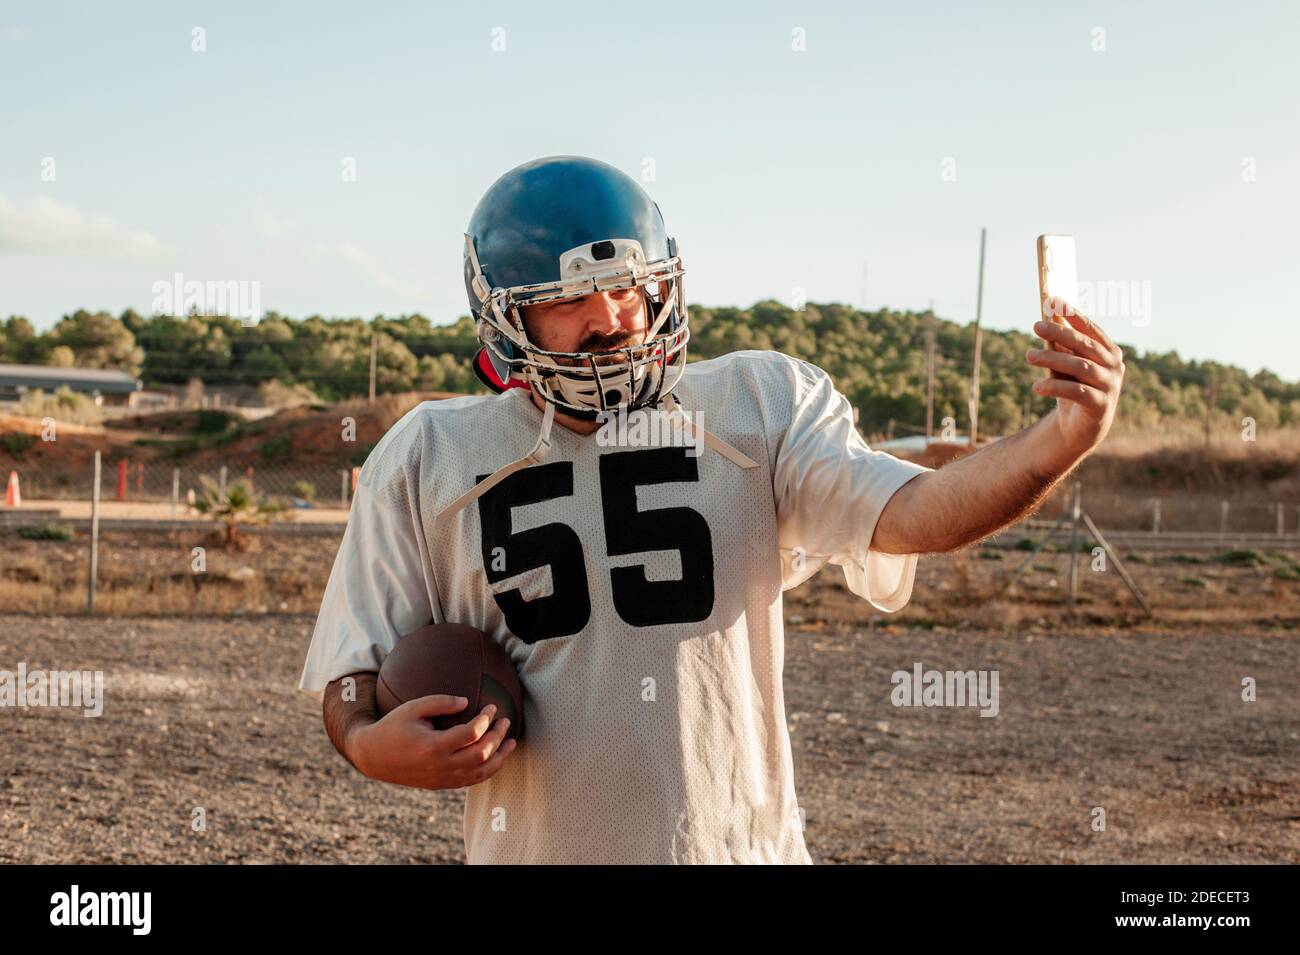 American football player using smartphone to take a selfie while holding a ball outdoors. Stock Photo